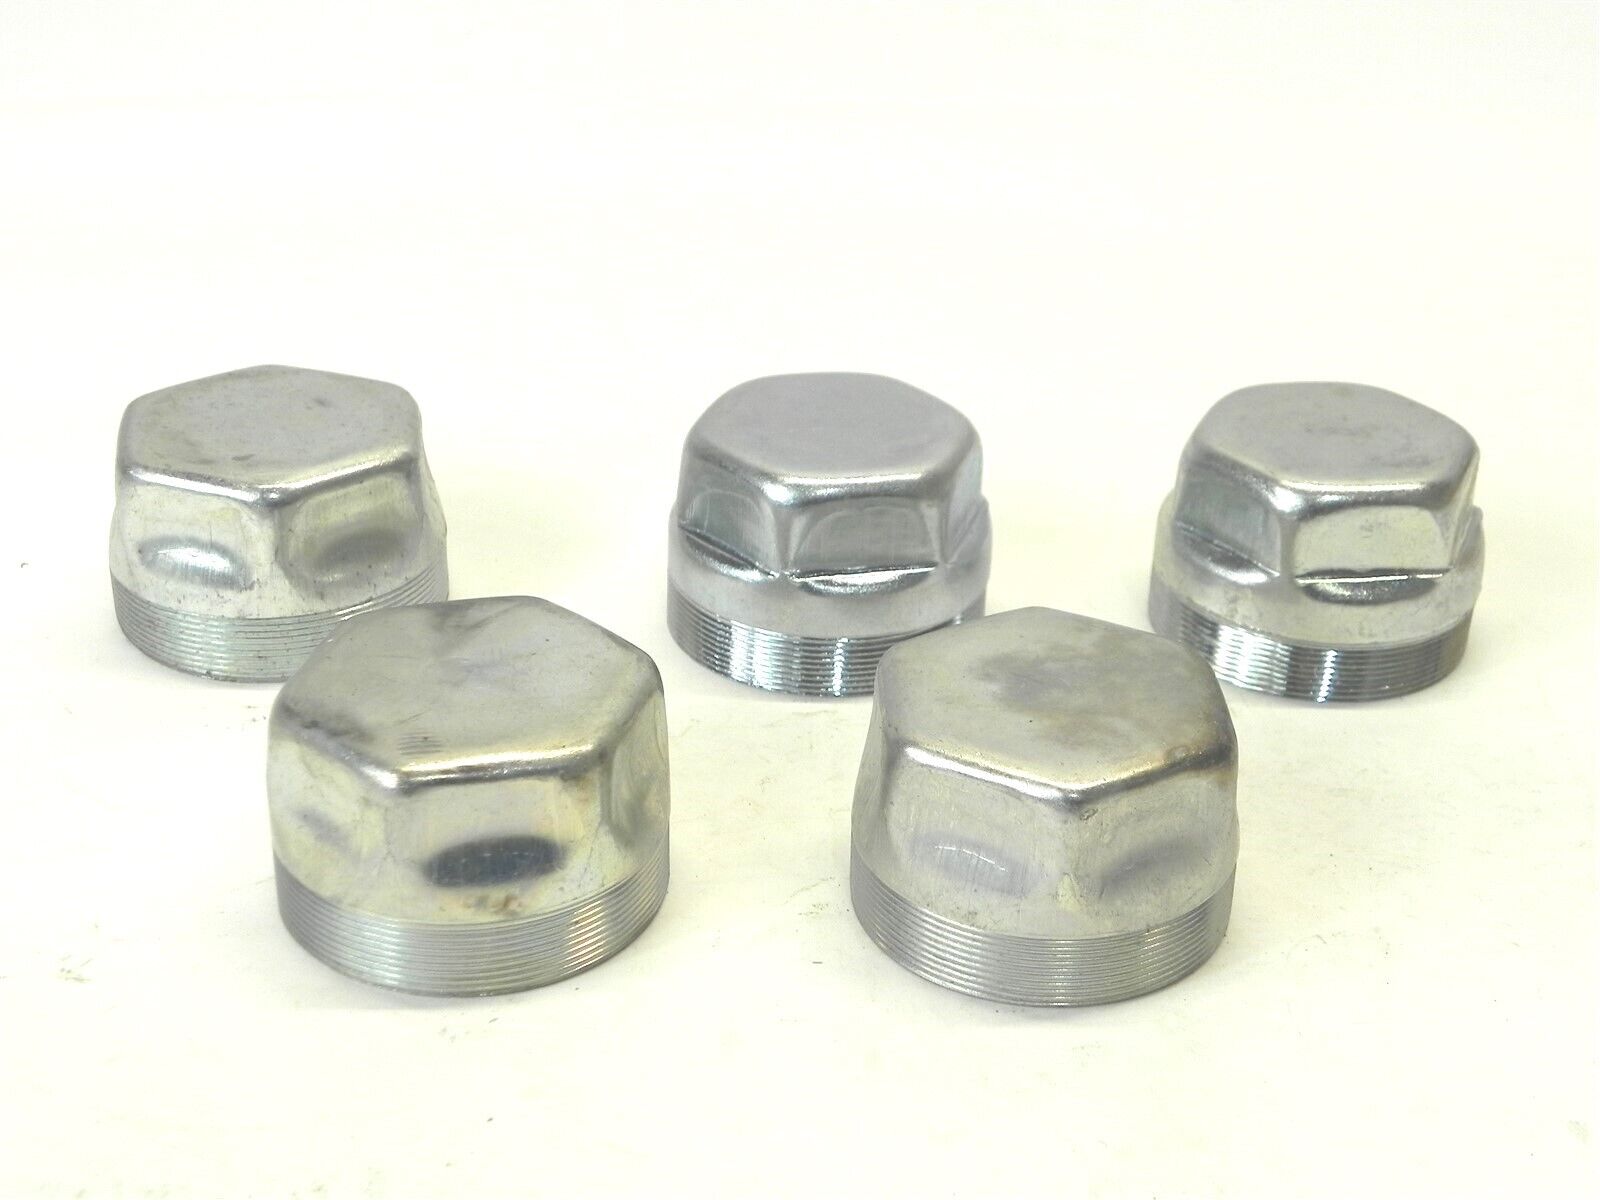 VINTAGE 1928-1948 FORD FRONT HUB DUST CAPS SET OF 5 FORD #68-1139 NORS 